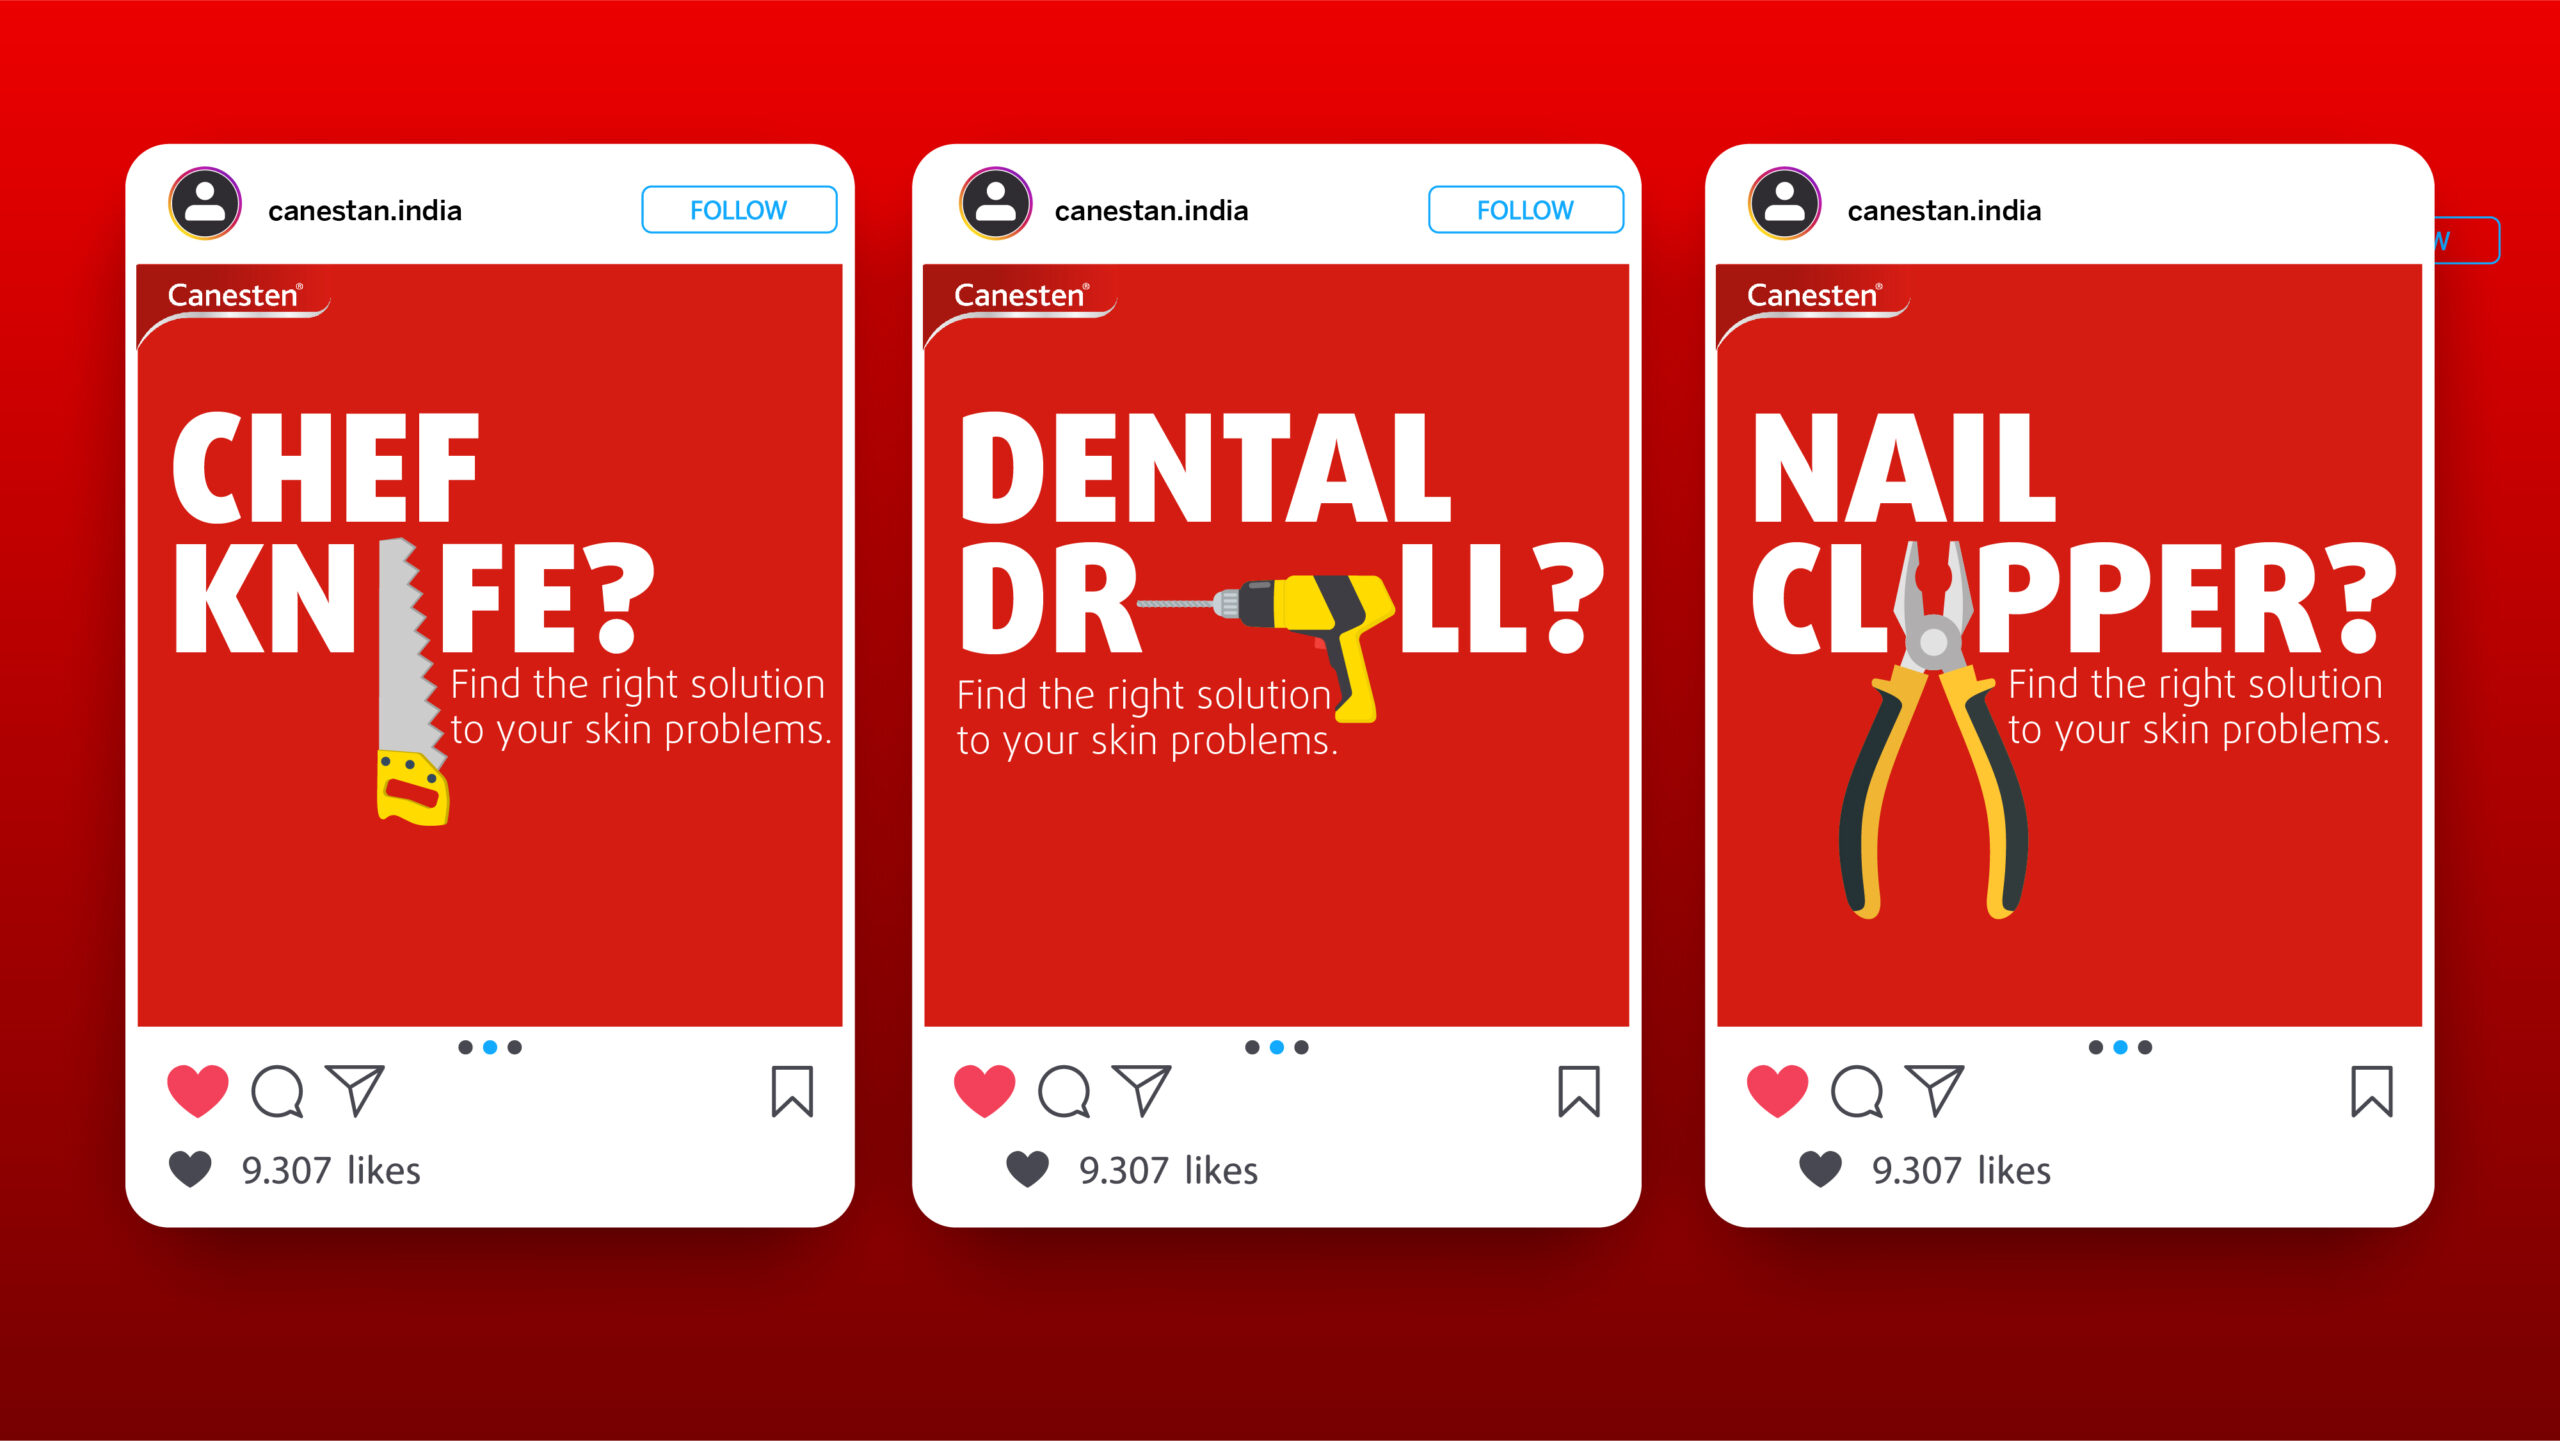 An image showcasing social media creatives for Canesten designed by DesignAnswers, featuring various designs and messaging related to the product. The creatives include bold colors, clear typography, and imagery related to women's health and wellness.